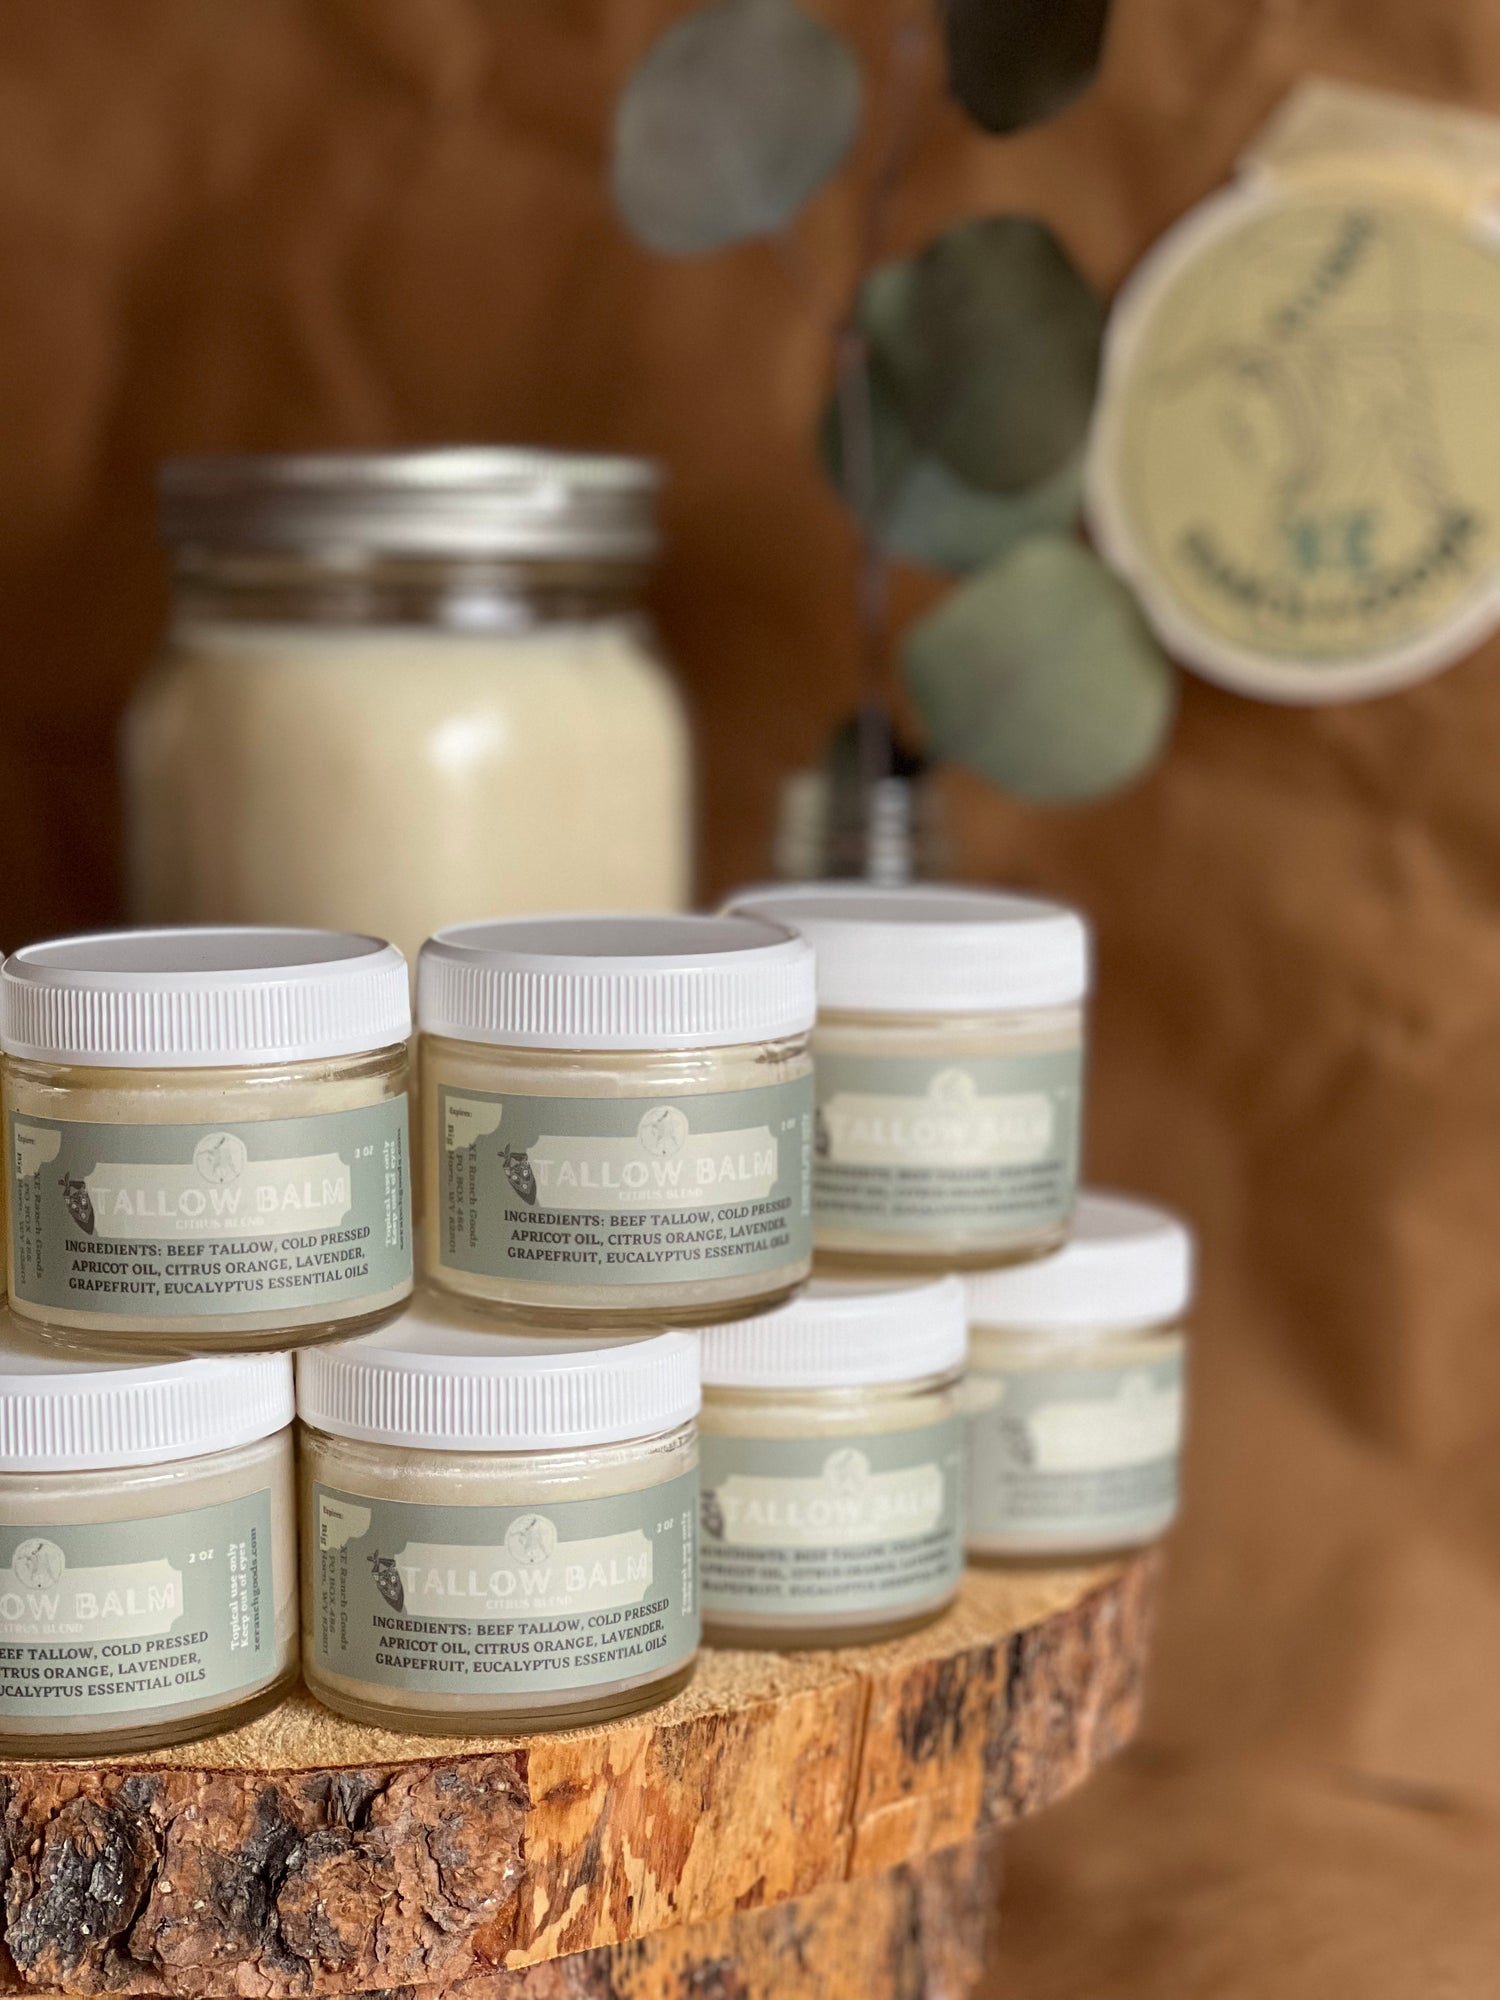 CLASSIC TALLOW BALM – Wing and Wool Farm